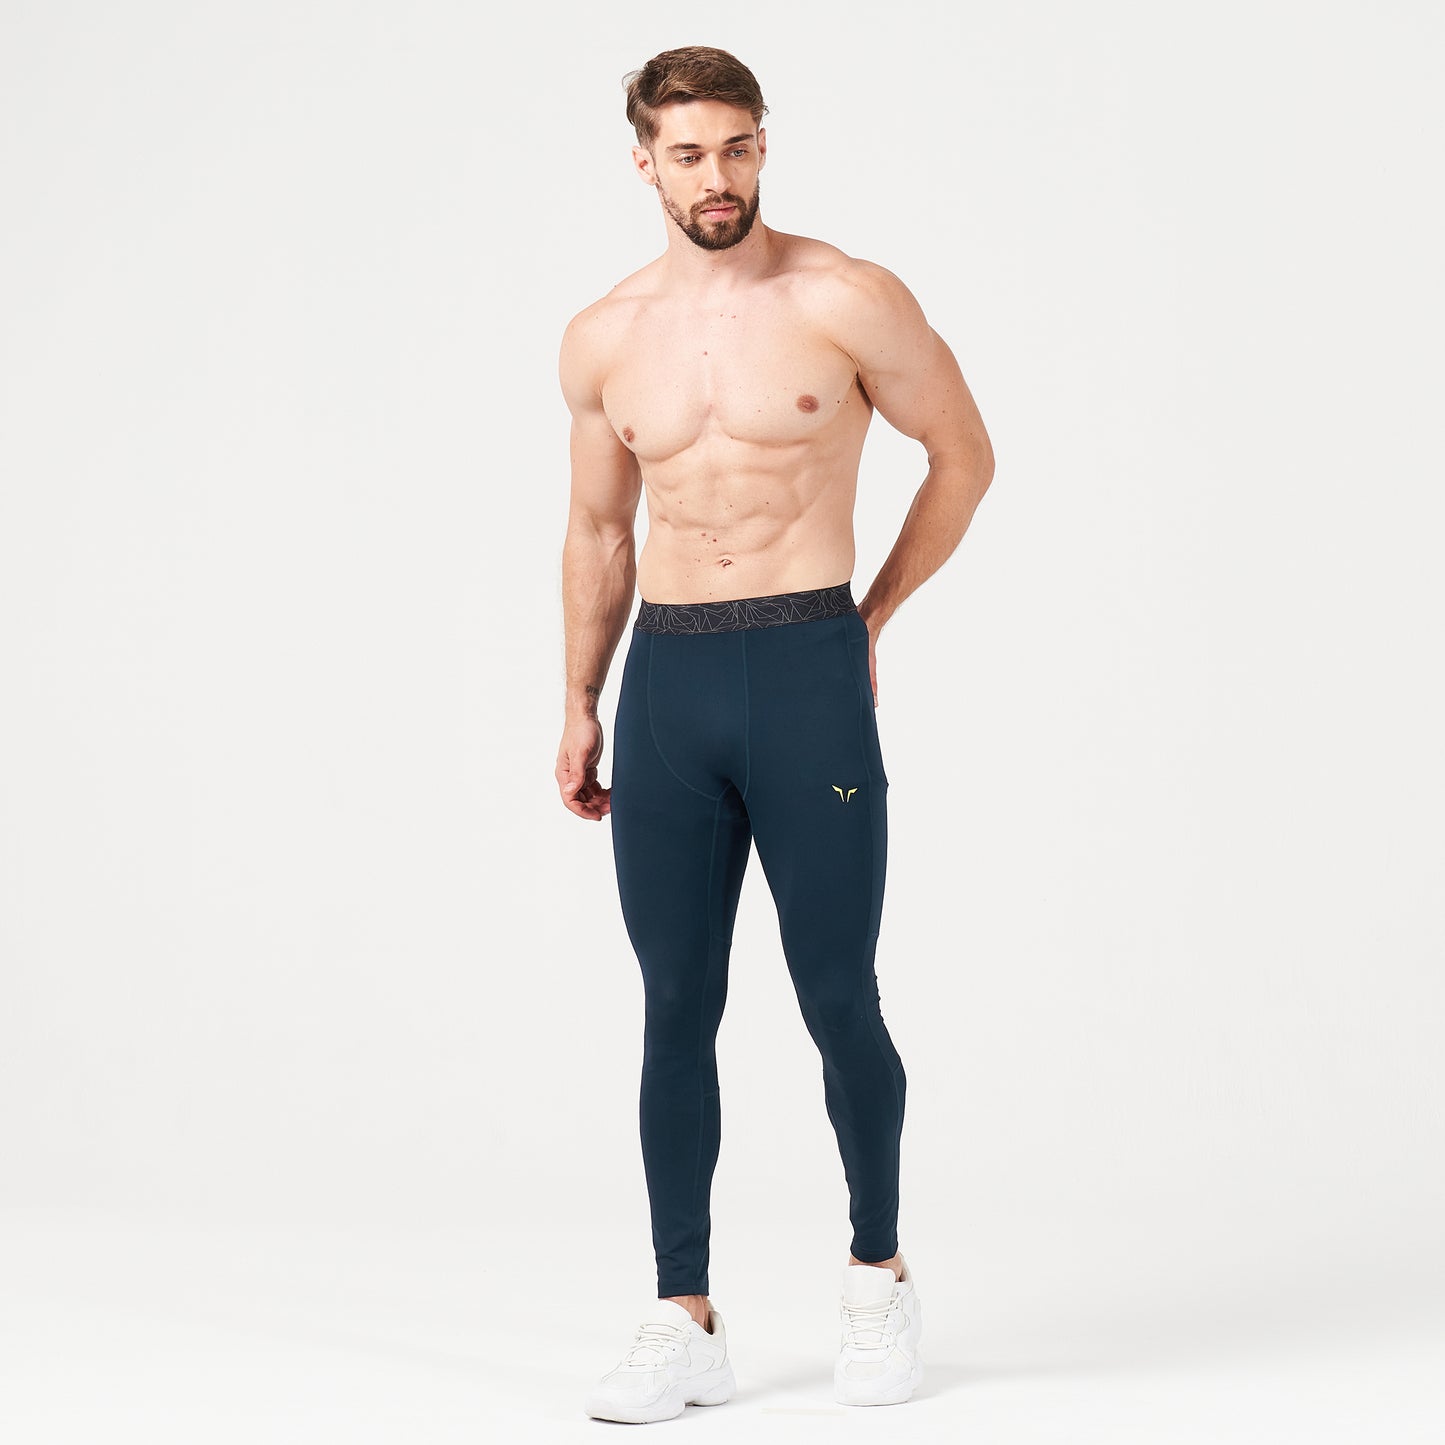 squatwolf-gym-wear-lab360-tdry-gym-tights-navy-workout-tights-for-men